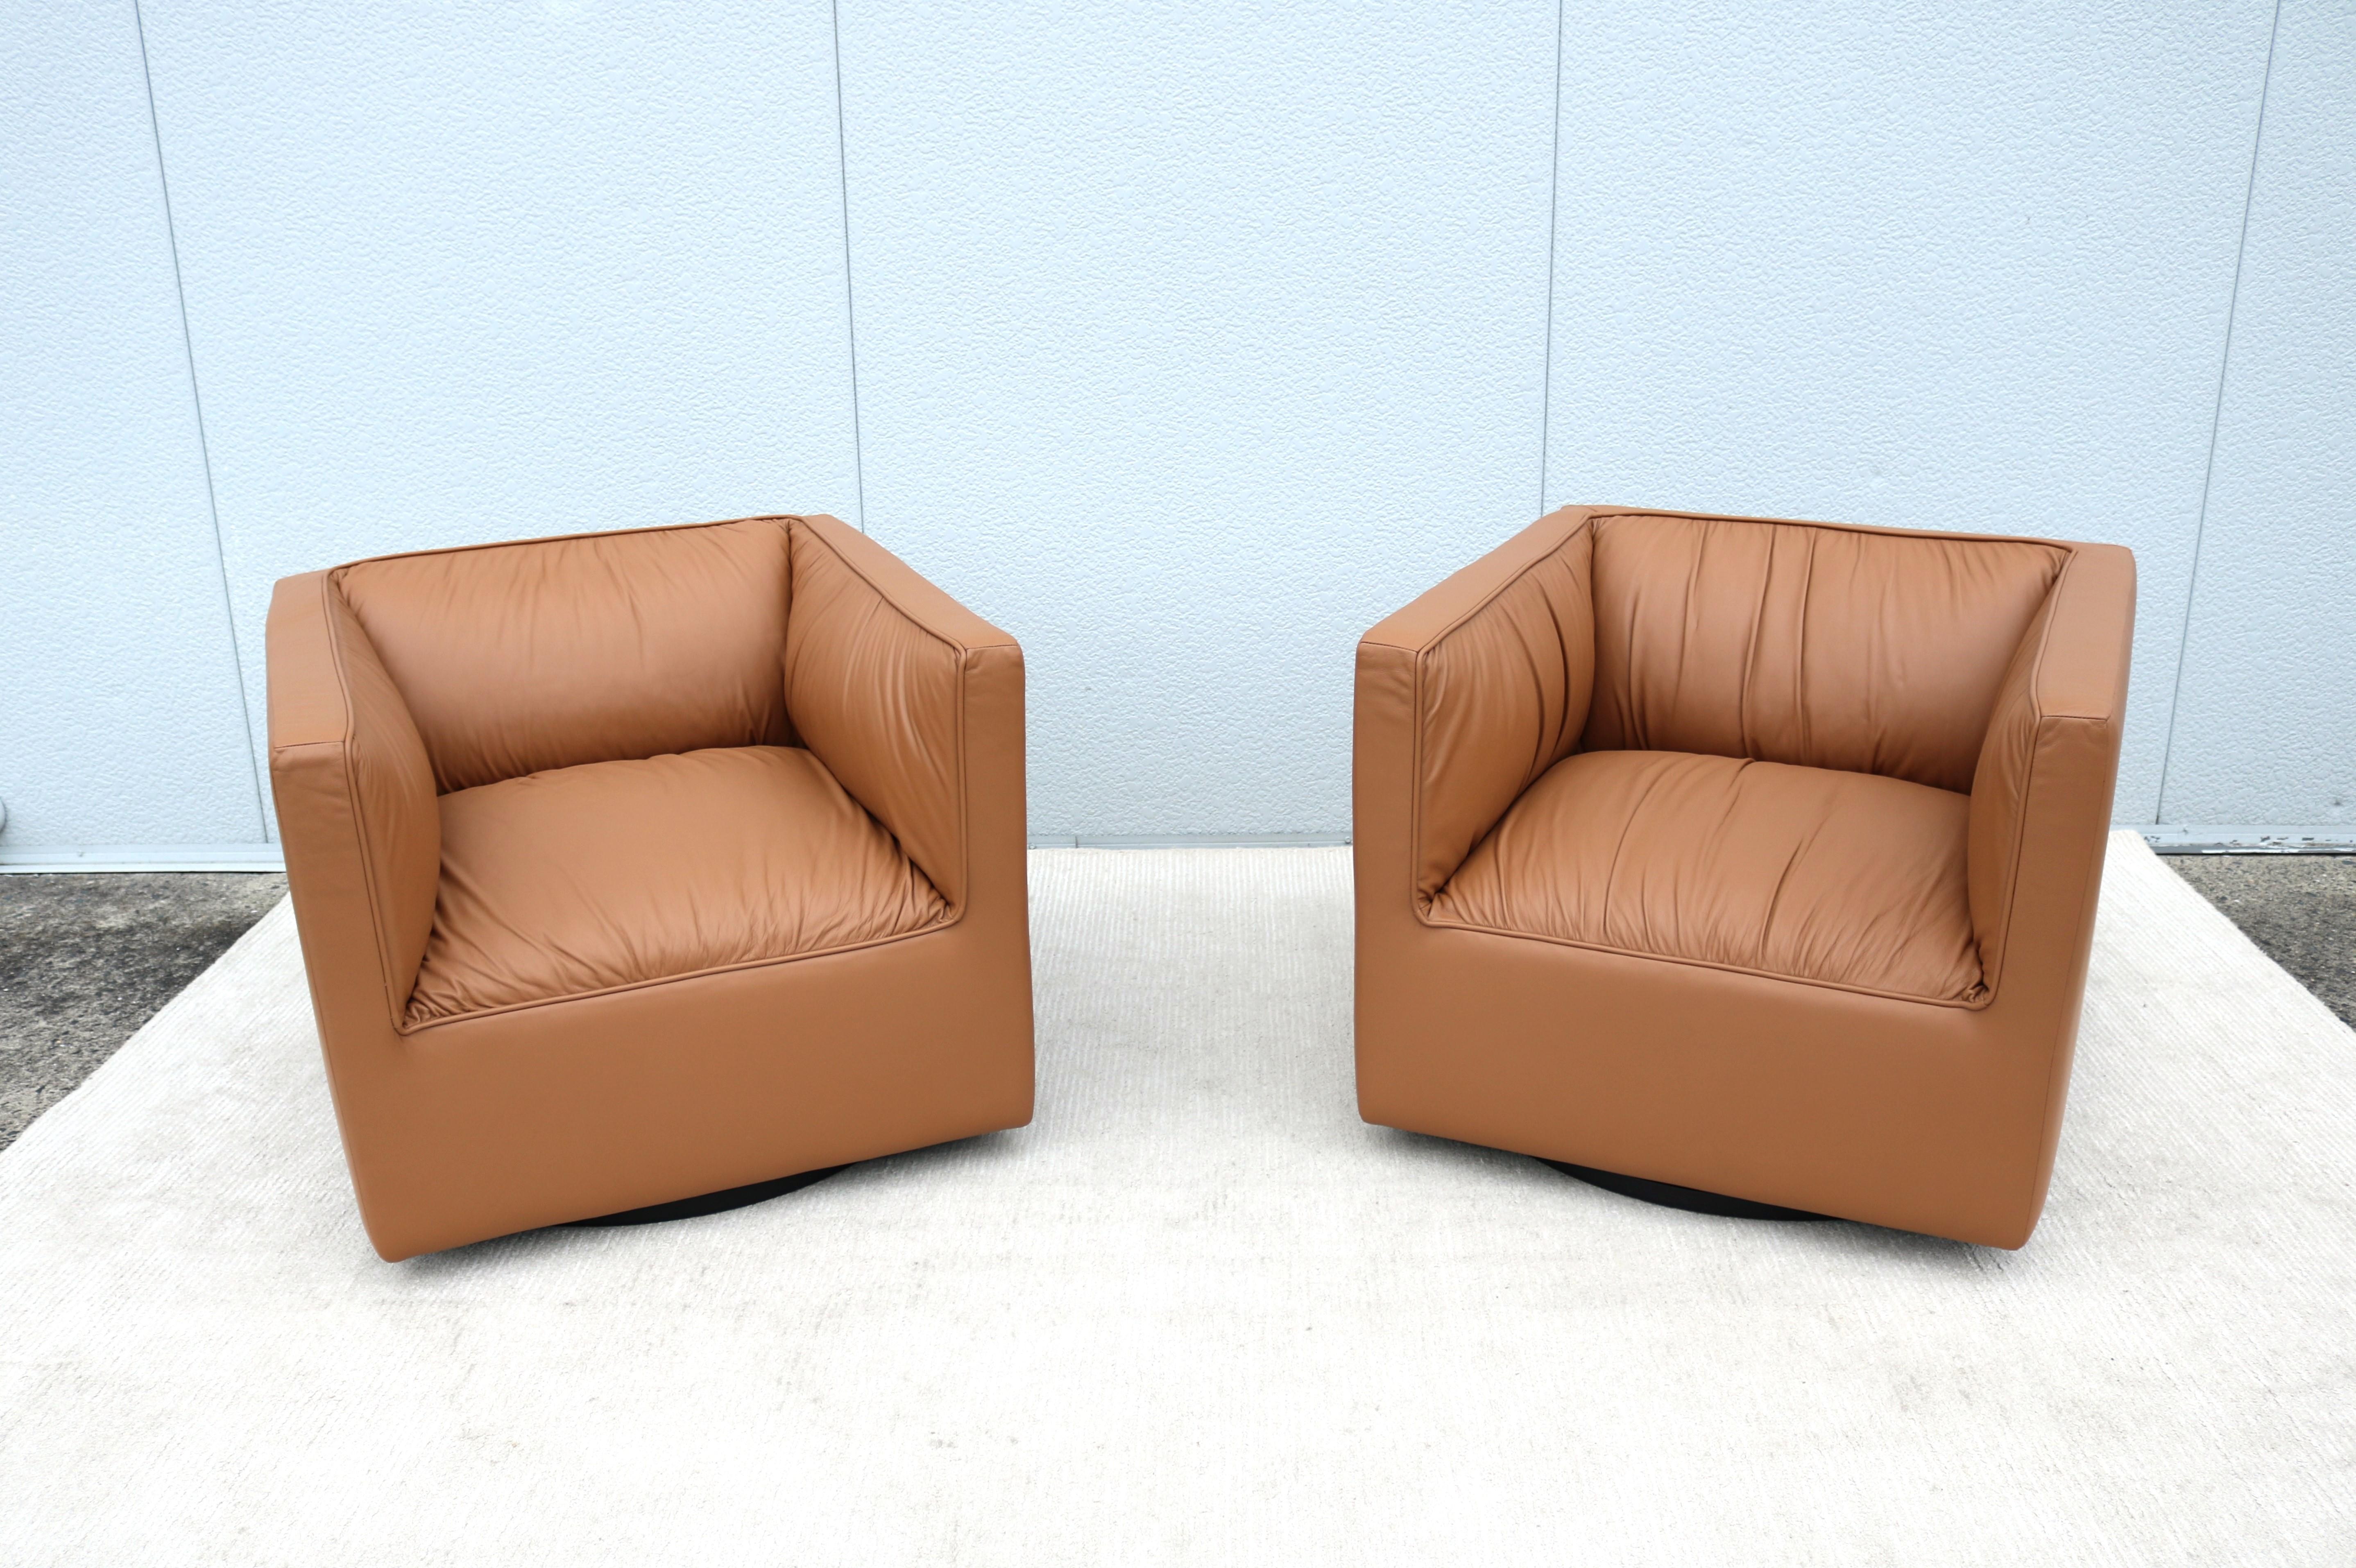 Fabulous pair of Infinito tan leather swivel club lounge chairs.
Designed by Toan Nguyen with an intentional, rigid exterior and a soft, relaxed interior.
Infinito brings a traditional lounge look with a not-so-classic feel to any scenario.
A new